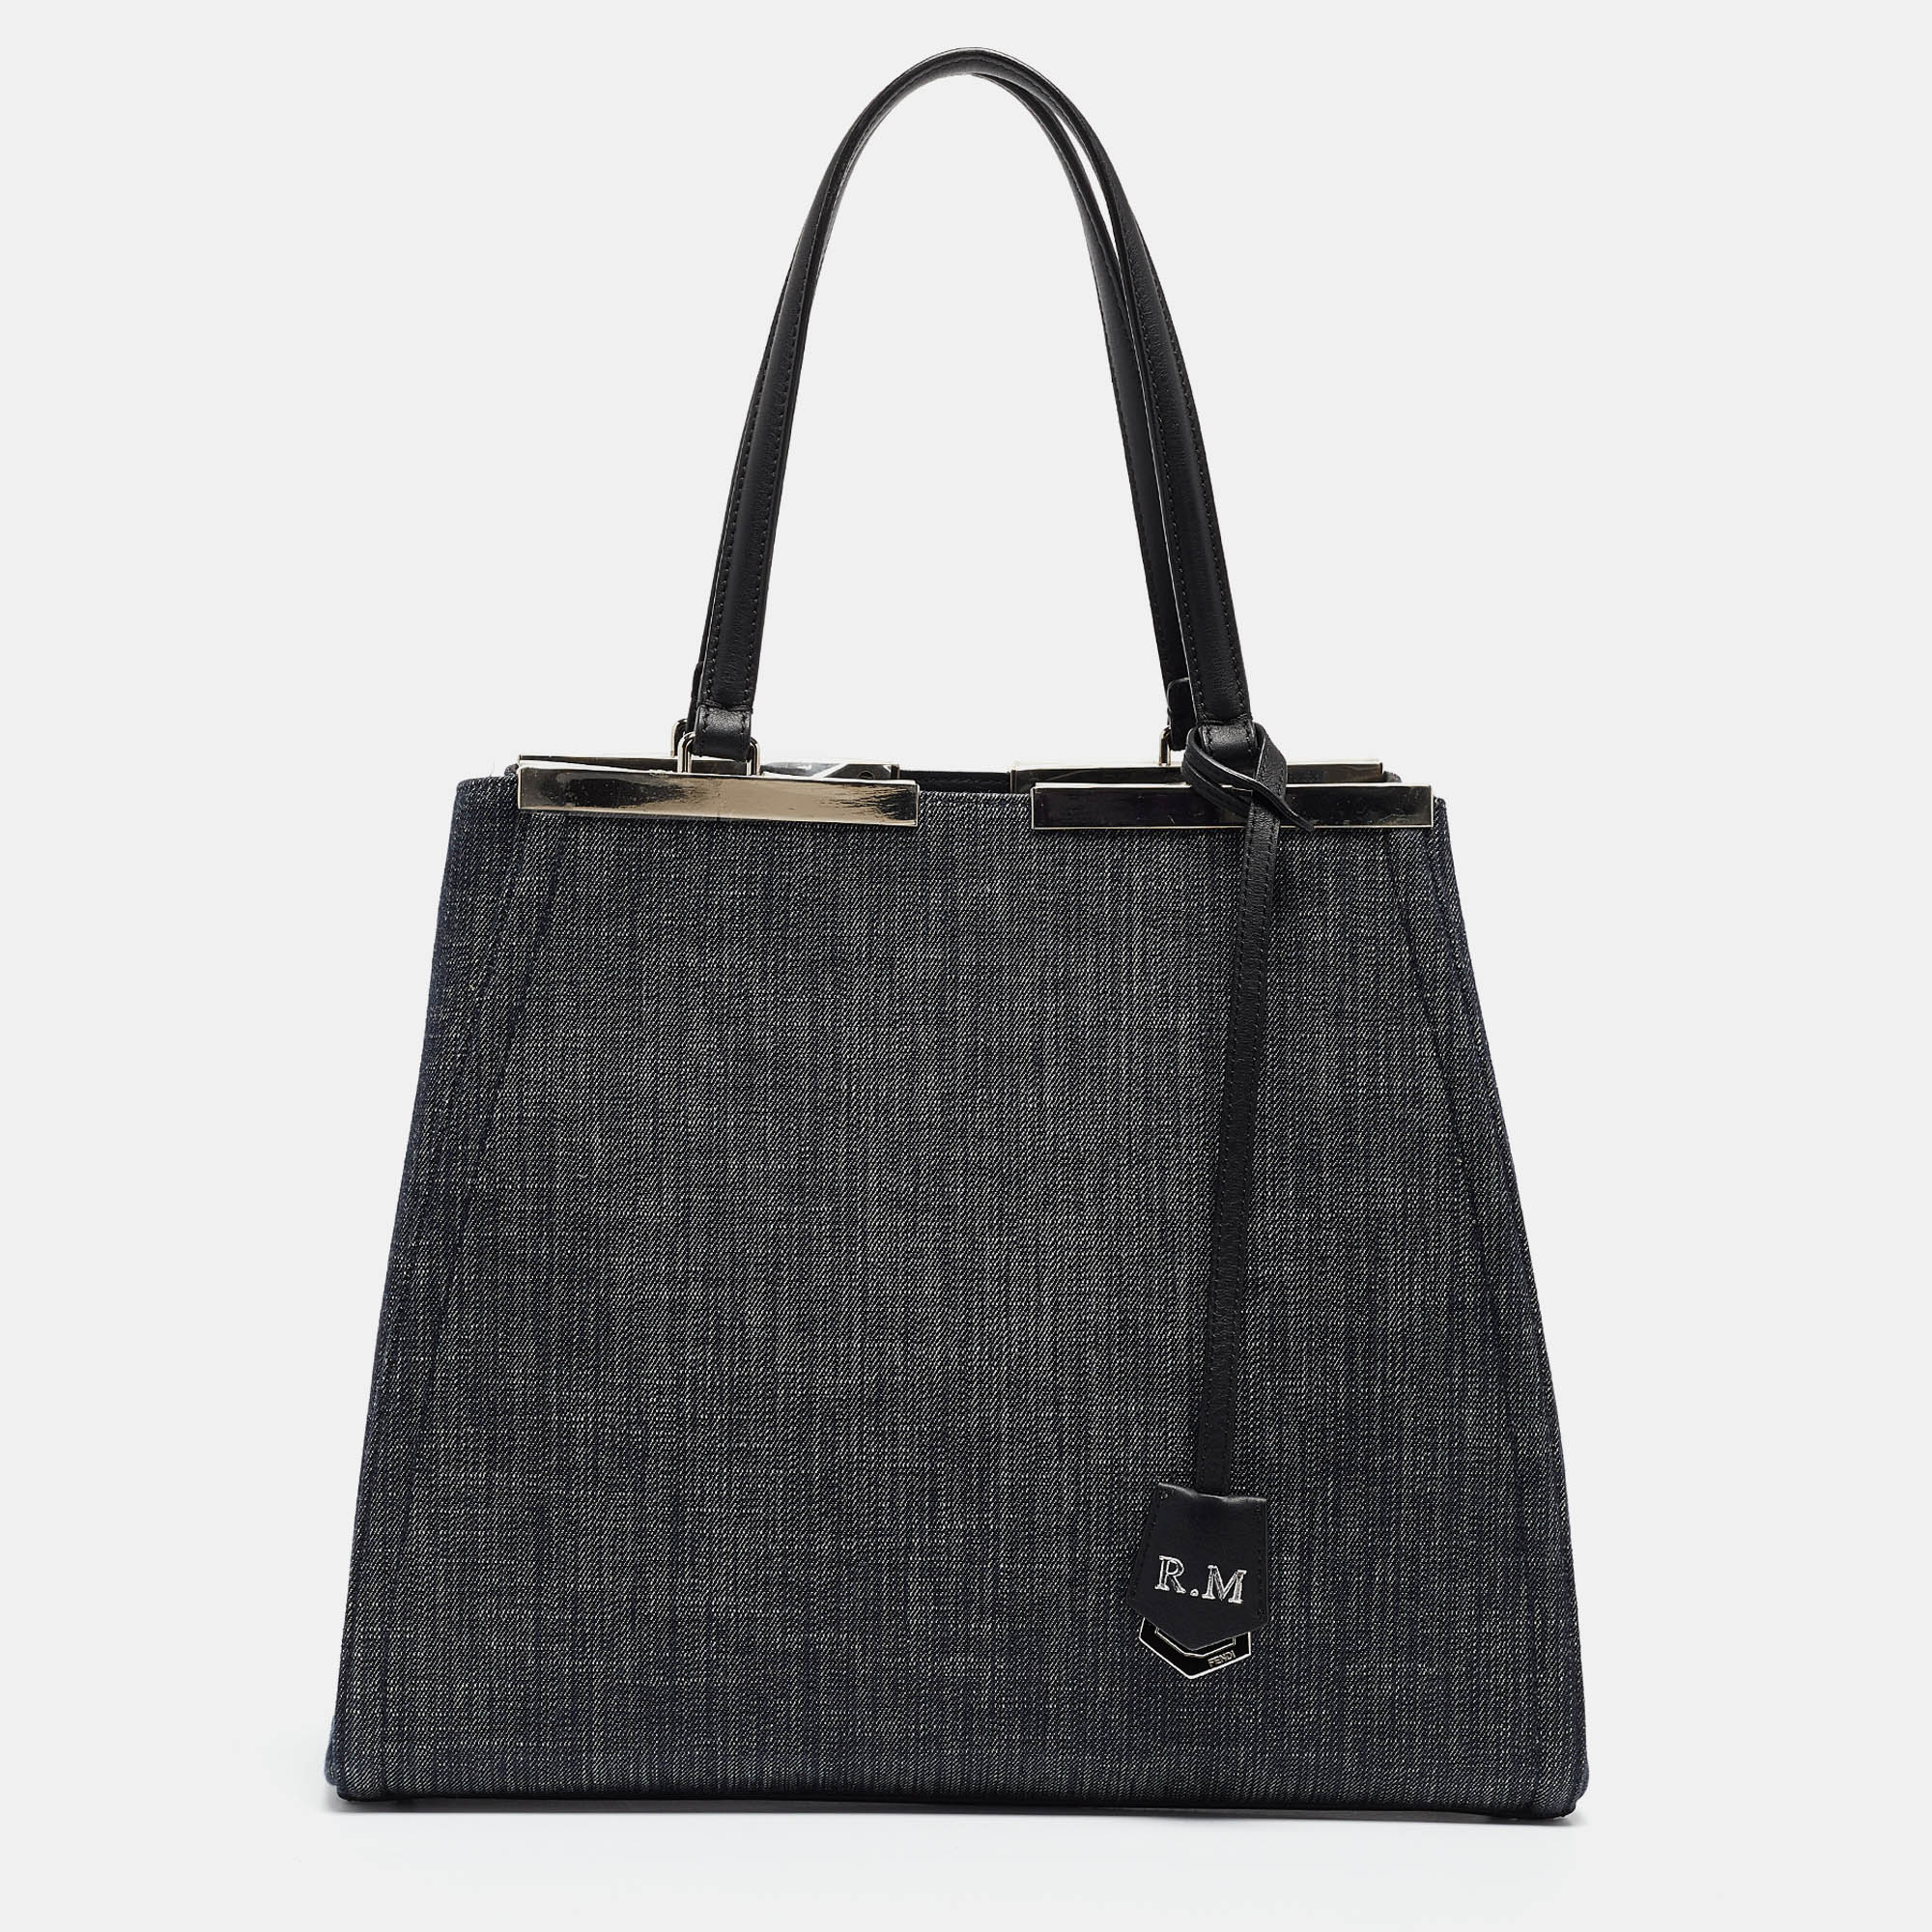 Fendis 2Jours tote is one of the most iconic designs from the label and it continues to receive the love of women around the world. Crafted from denim the bag can be carried around with top dual handles. It is also equipped with spaciously sized and finished with silver tone hardware.